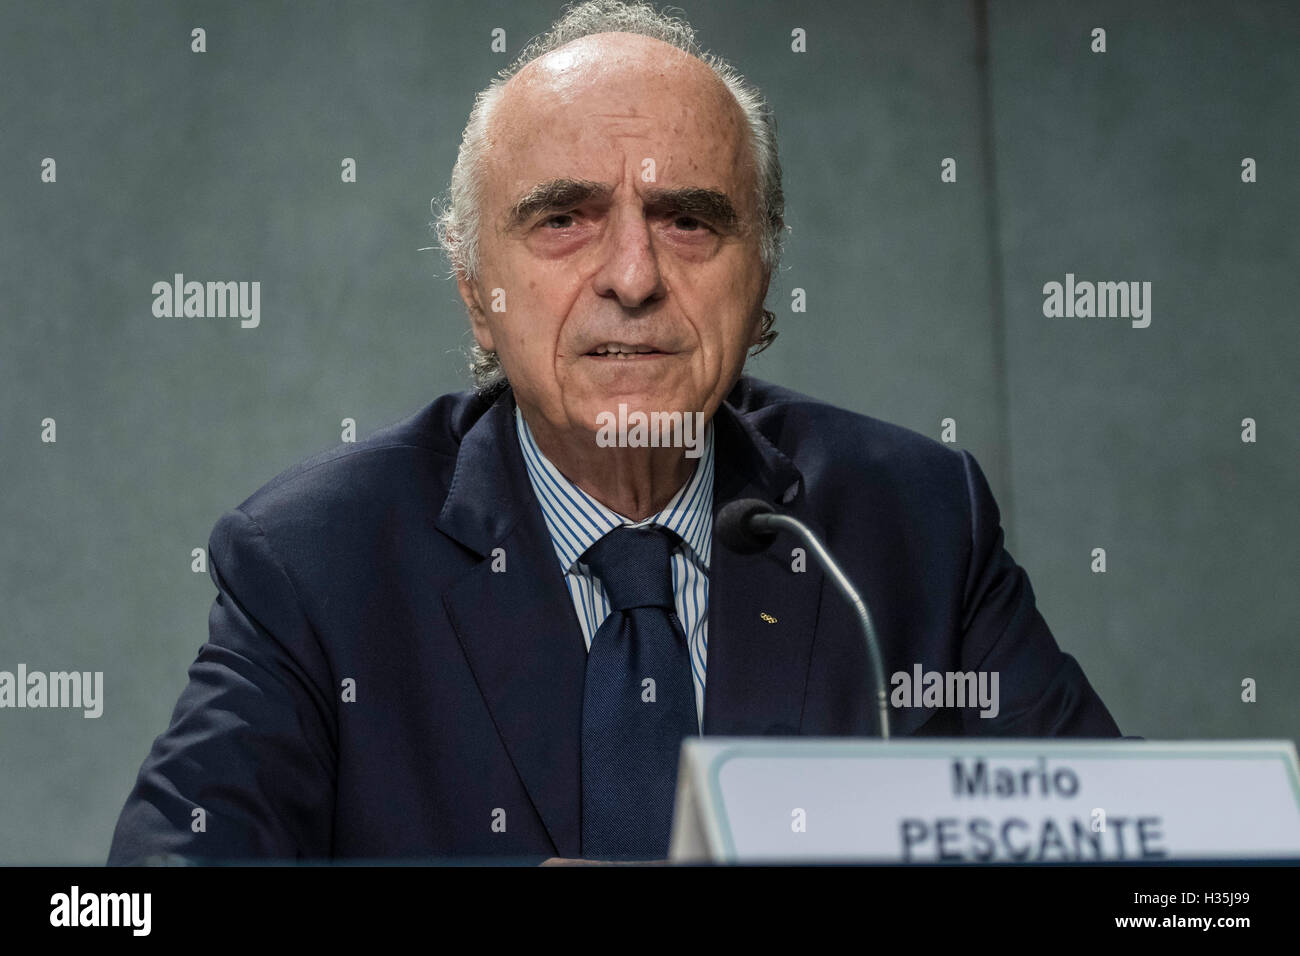 Vatican City, Vatican. 04th Oct, 2016. Mario Pescante, Olympic Committee Vice-president, attends a press conference, at the Vatican Press Center, in Vatican City, Vatican on October 04, 2016. The Vatican will be hosting the first 'Sport at the Service of Humanity' conference with Pope Francis scheduled to participate at the opening ceremony Wednesday Oct. 5, 2016, along with UN secretary general Ban Ki-moon and International Olympic Committee President Thomas Bach. Credit:  Giuseppe Ciccia/Pacific Press/Alamy Live News Stock Photo